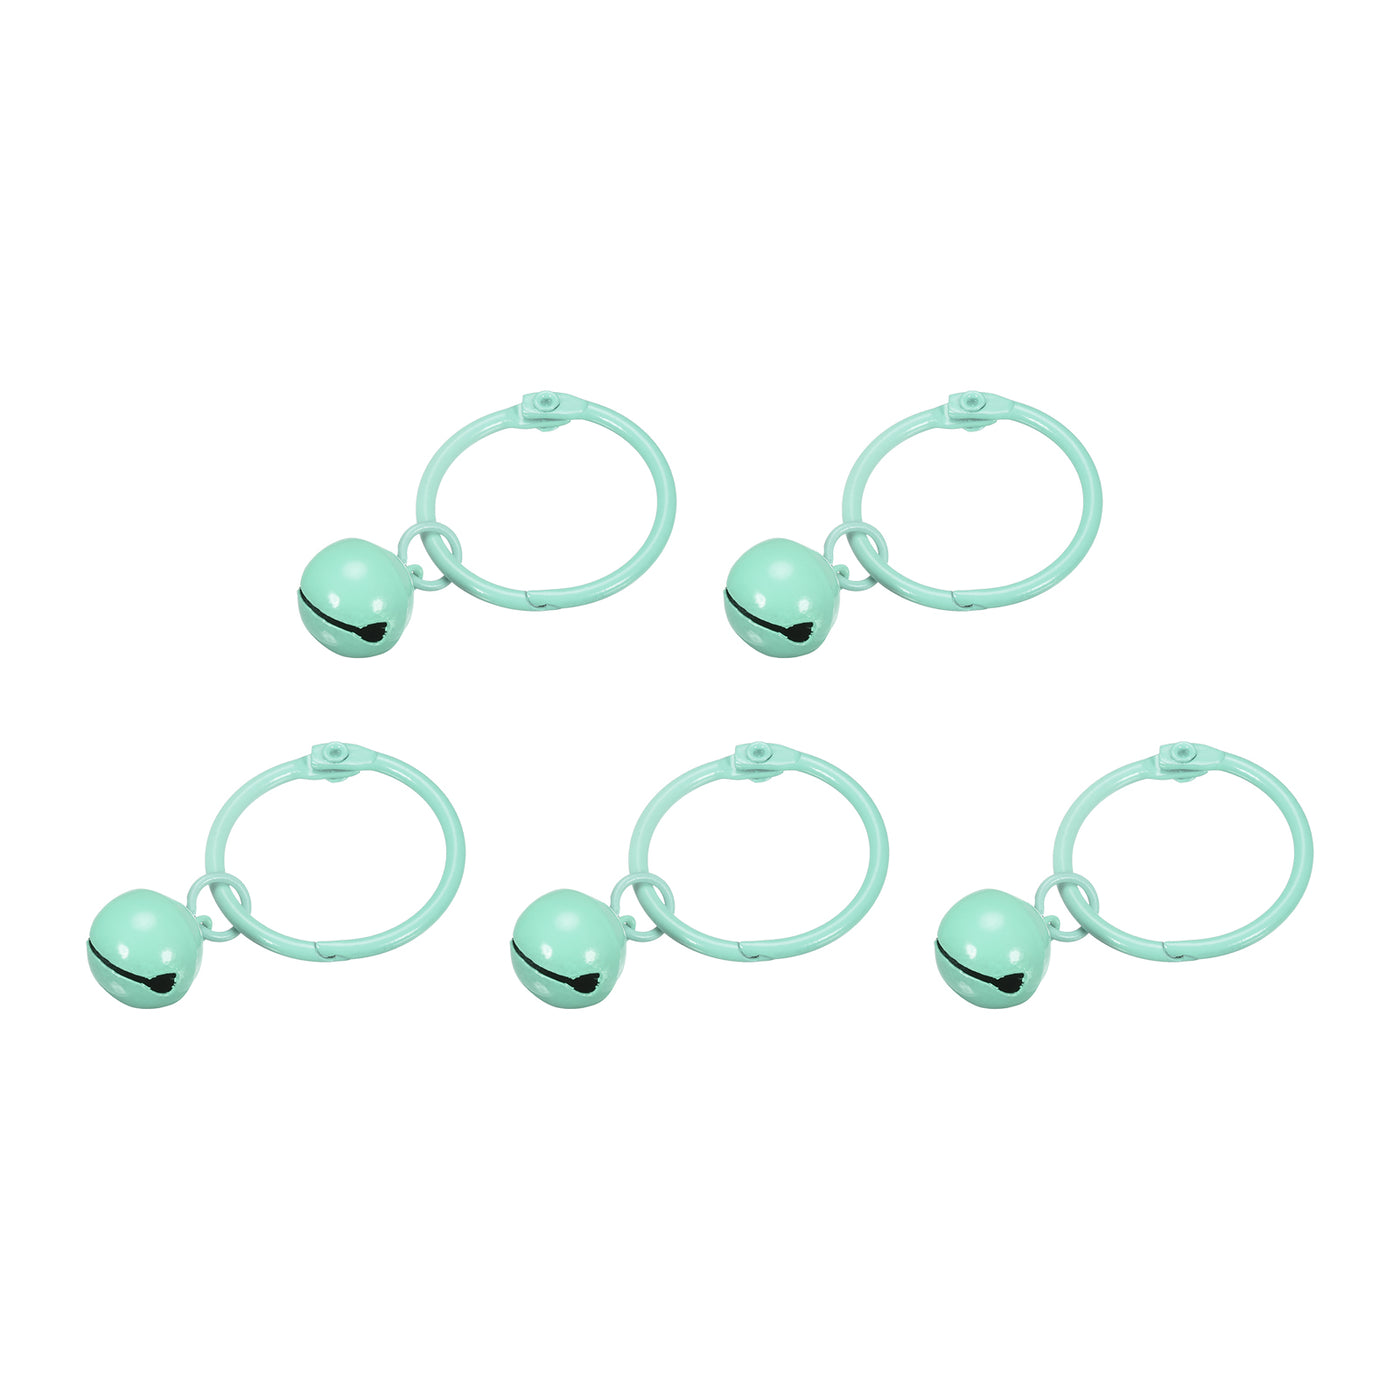 uxcell Uxcell 5Pcs Keyrings with Bells, Light Green 30mm/0.51" Dia Jingle Bell for DIY Crafts